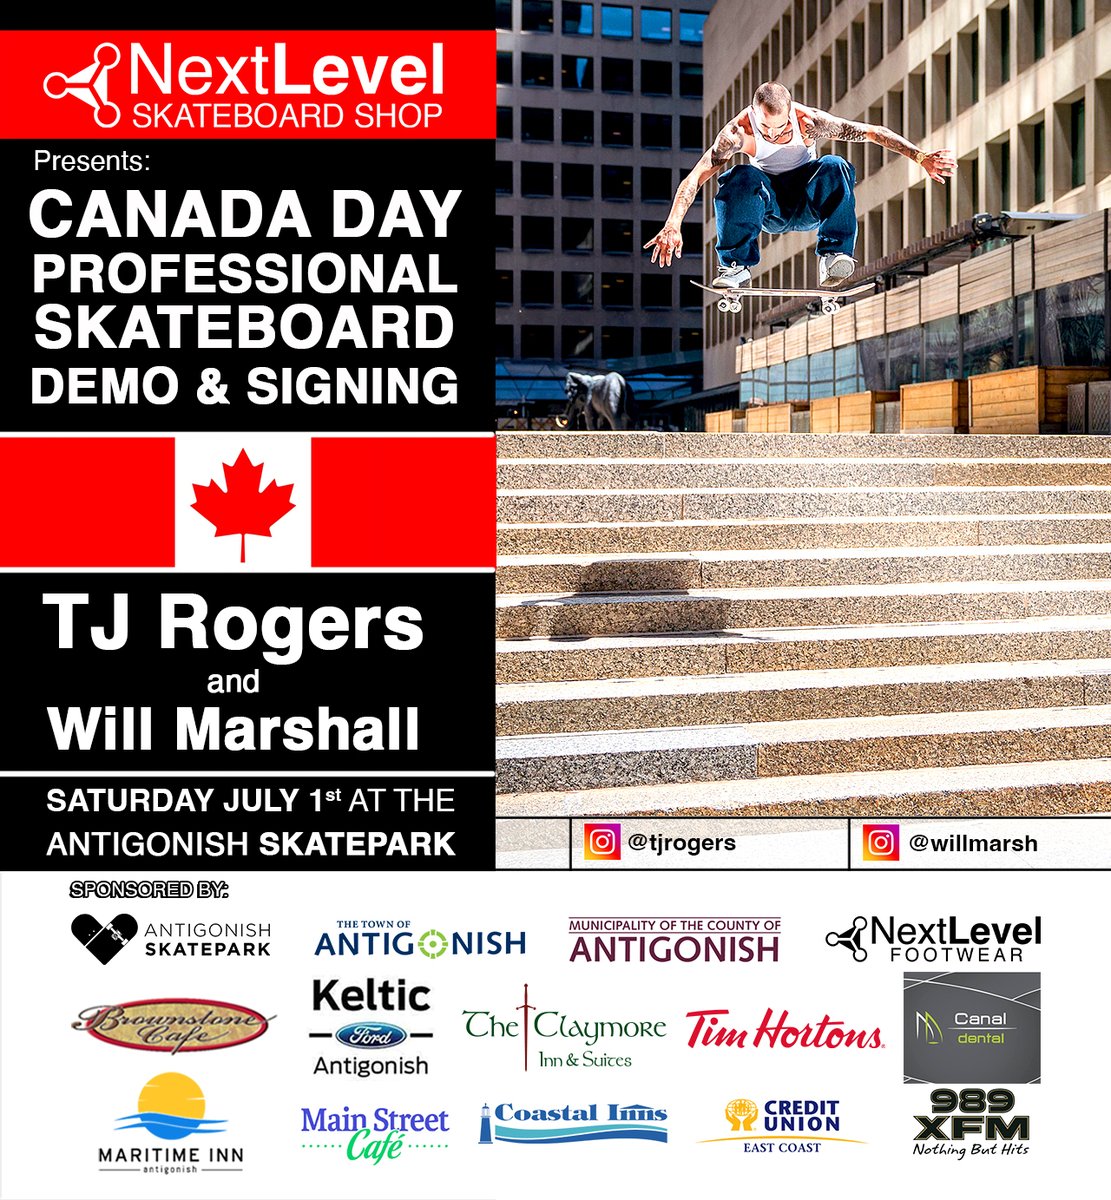 @NextLevelSk8 Shop Presents Canada Day Demo and Signing at the @AntigonishSK8
We will be hosting @tjrogers_1 and Will Marshall!

#skateboarding #skateboard #skatepark #skateshop #skateboards #skateboarder #art #skatergirl #tjrogers #canadaday #willmarshall #antigonish #novascotia